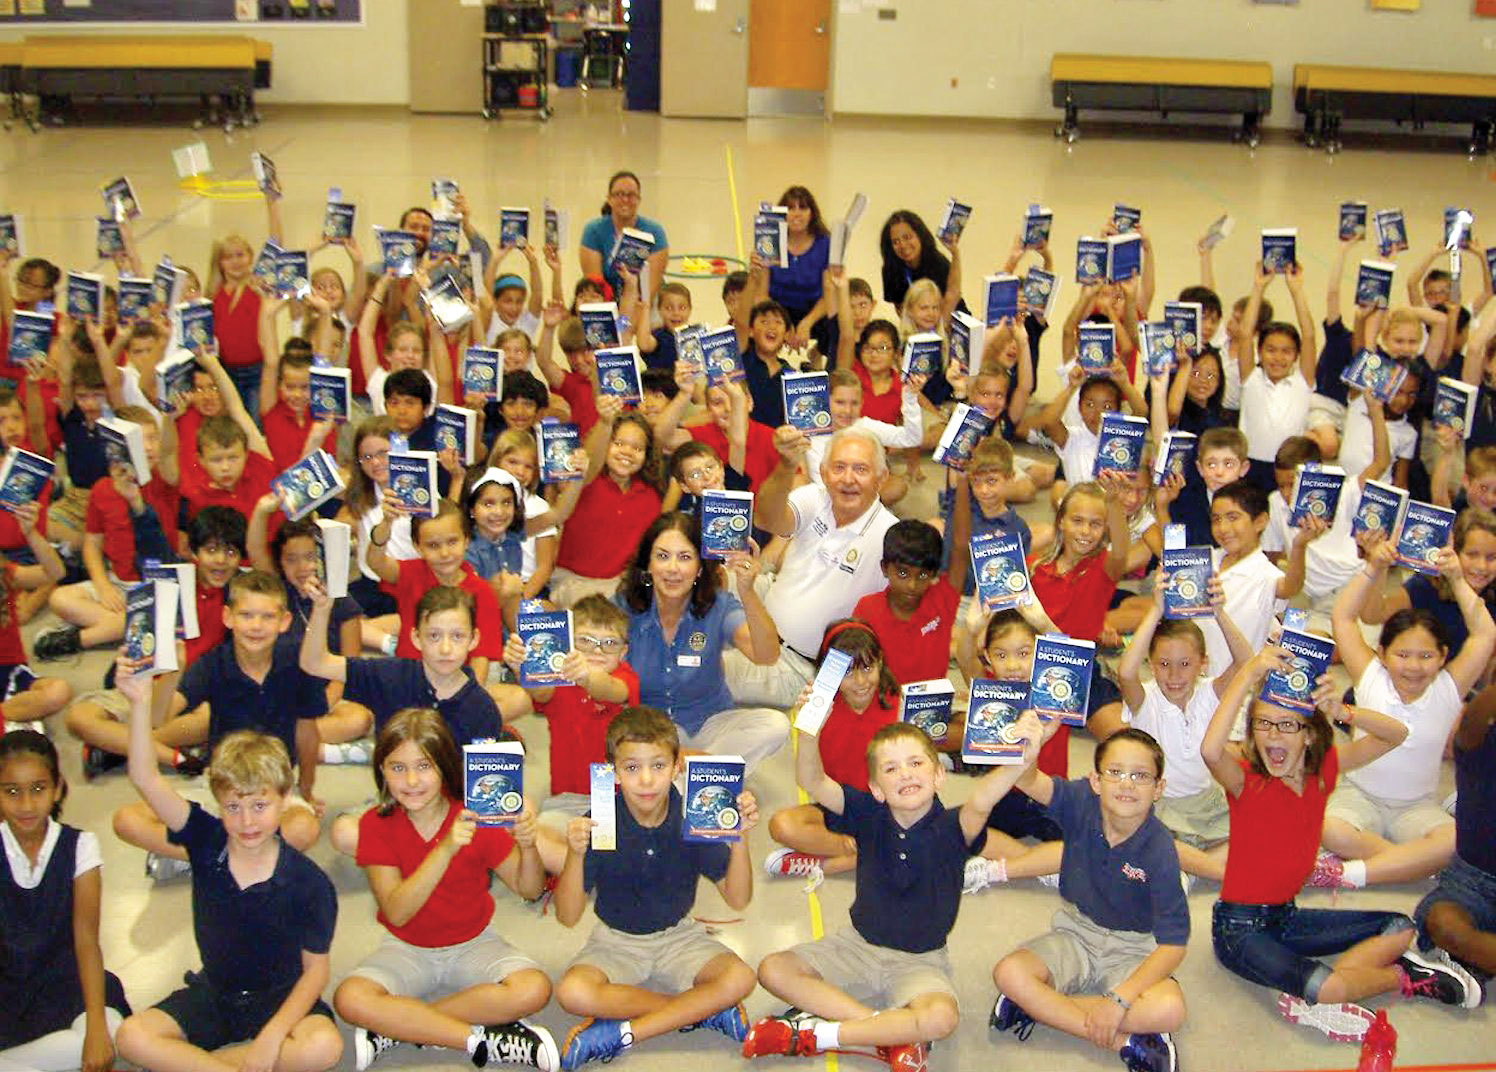 Rotarians Gary and Bonnie Whiting present dictionaries to third grade students at Navarette Elementary School.